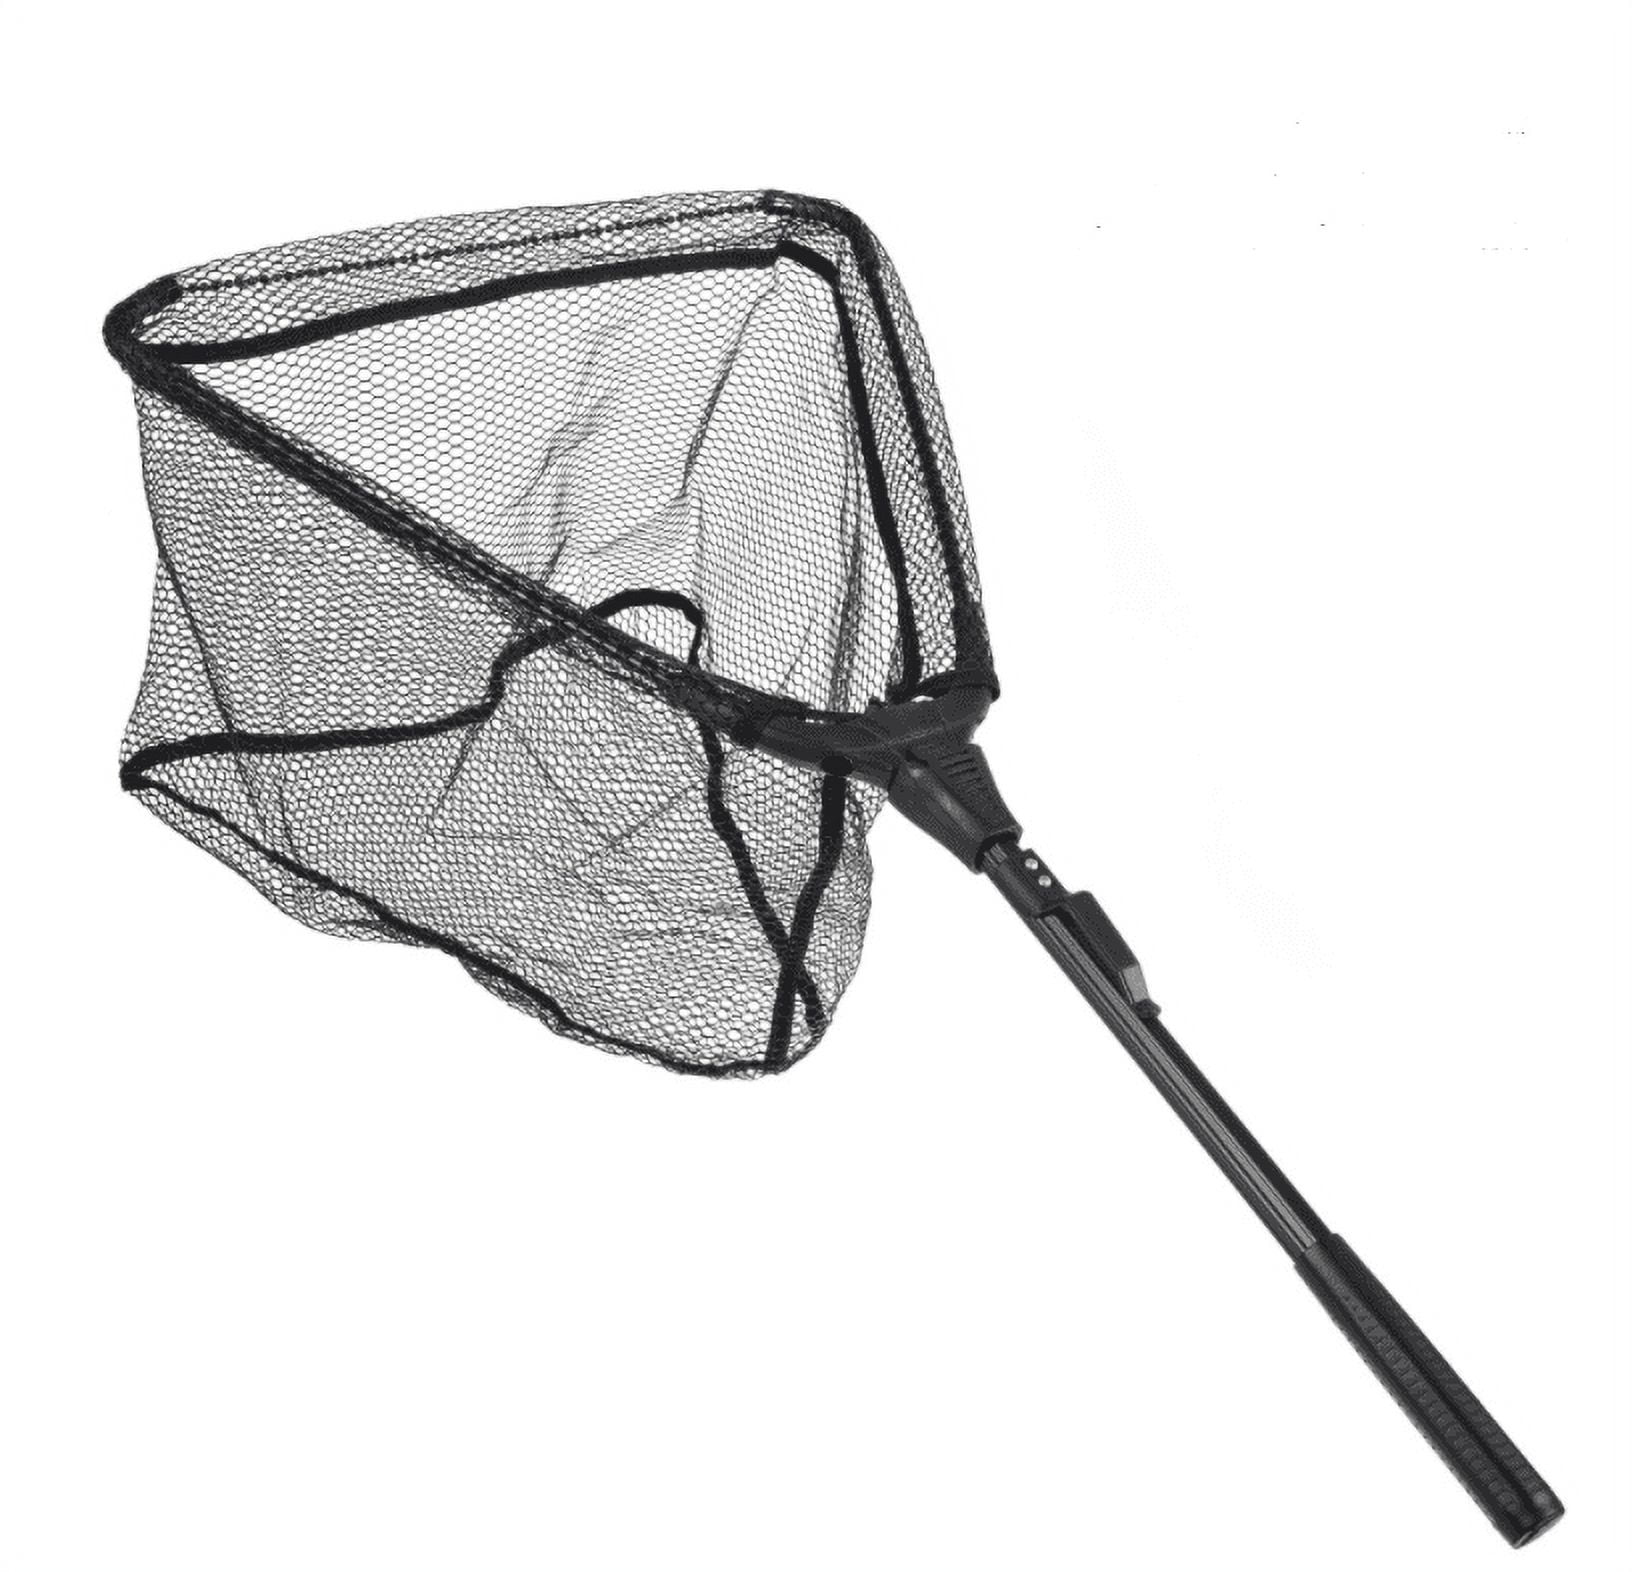 Fishing Net Folding Landing Net - Collapsible Fishing Nets with Telescopic  Pole Handle, Durable Rubber Coating Knotless Mesh, Safe Fish Catching and  Releasing 